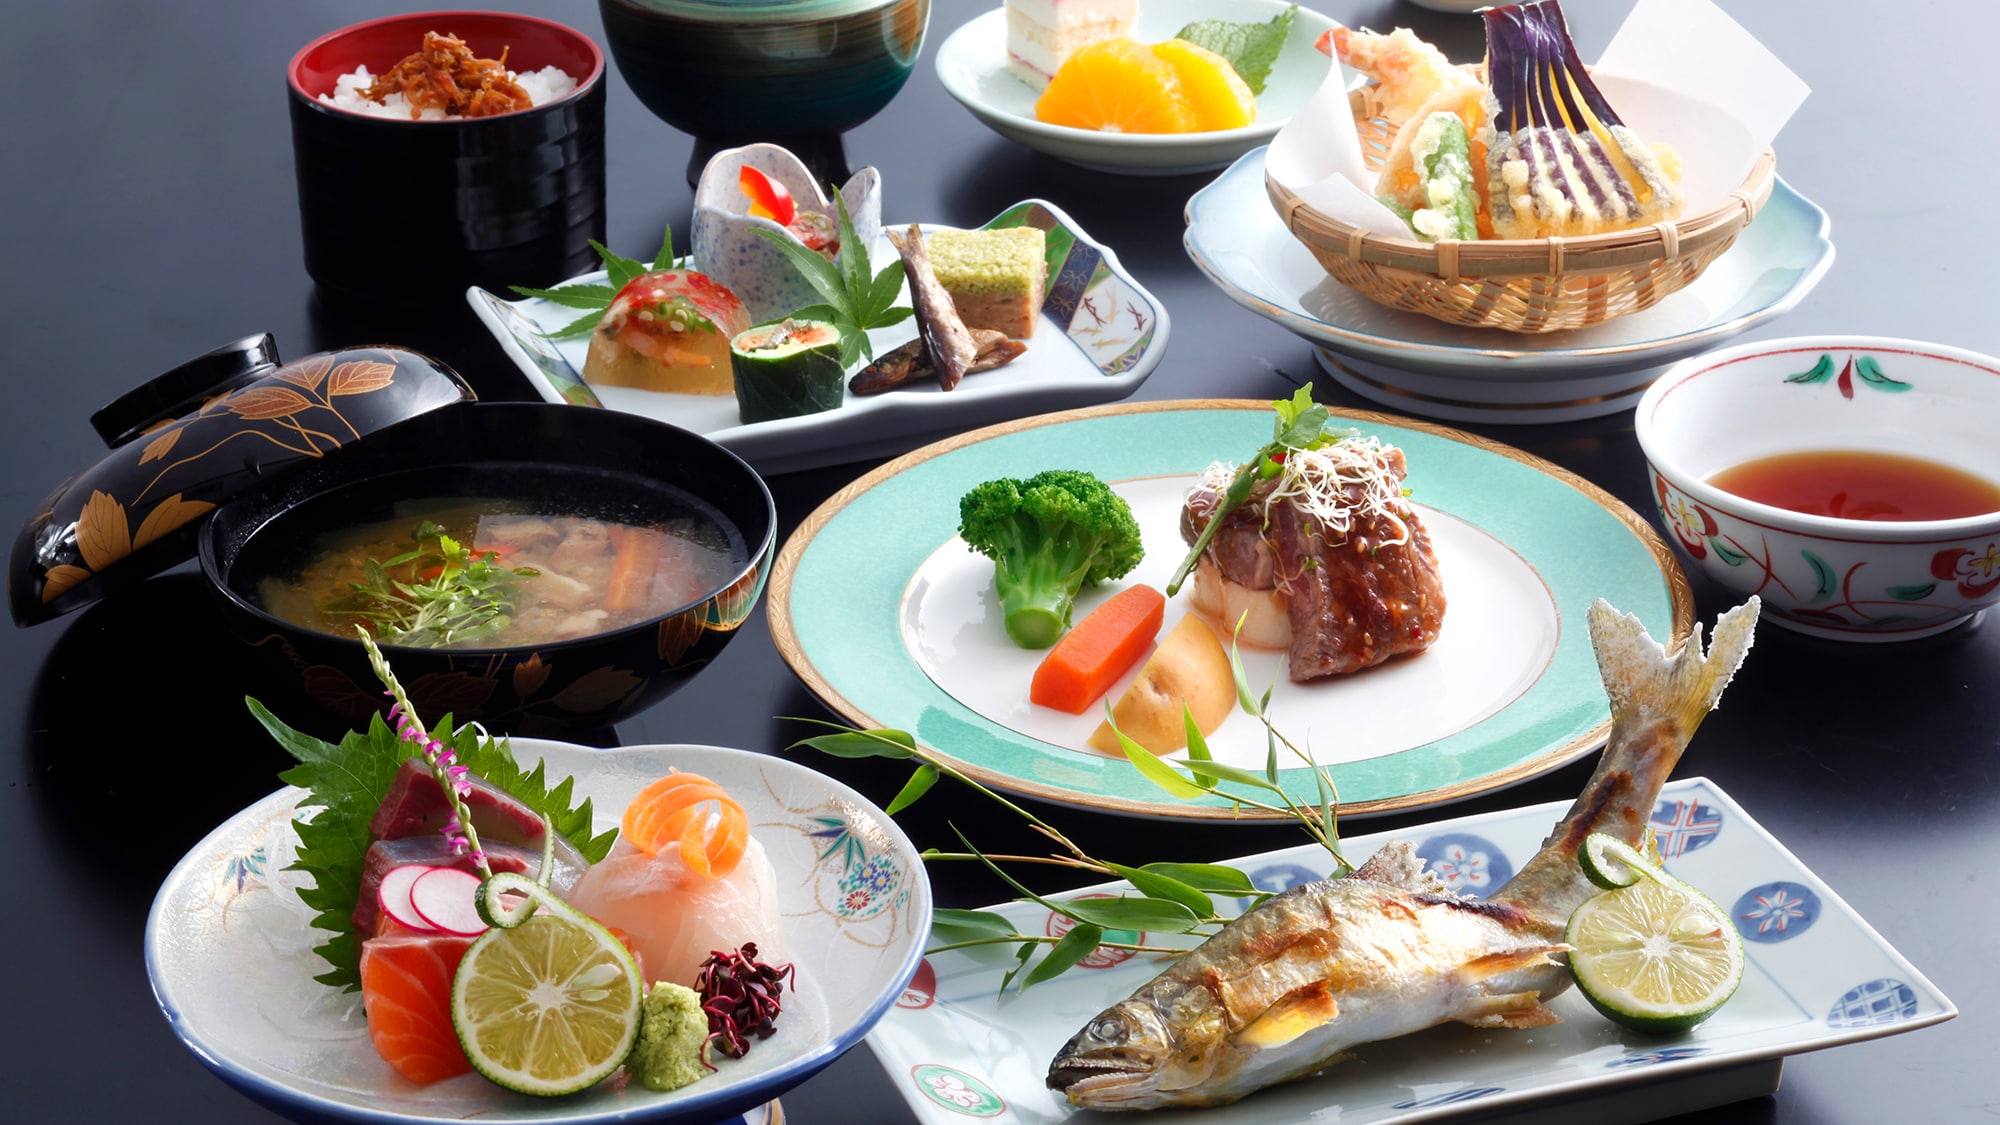 [Basic Kaiseki] Please enjoy the fruits of the mountains and sea such as "sashimi" and "fillet steak".